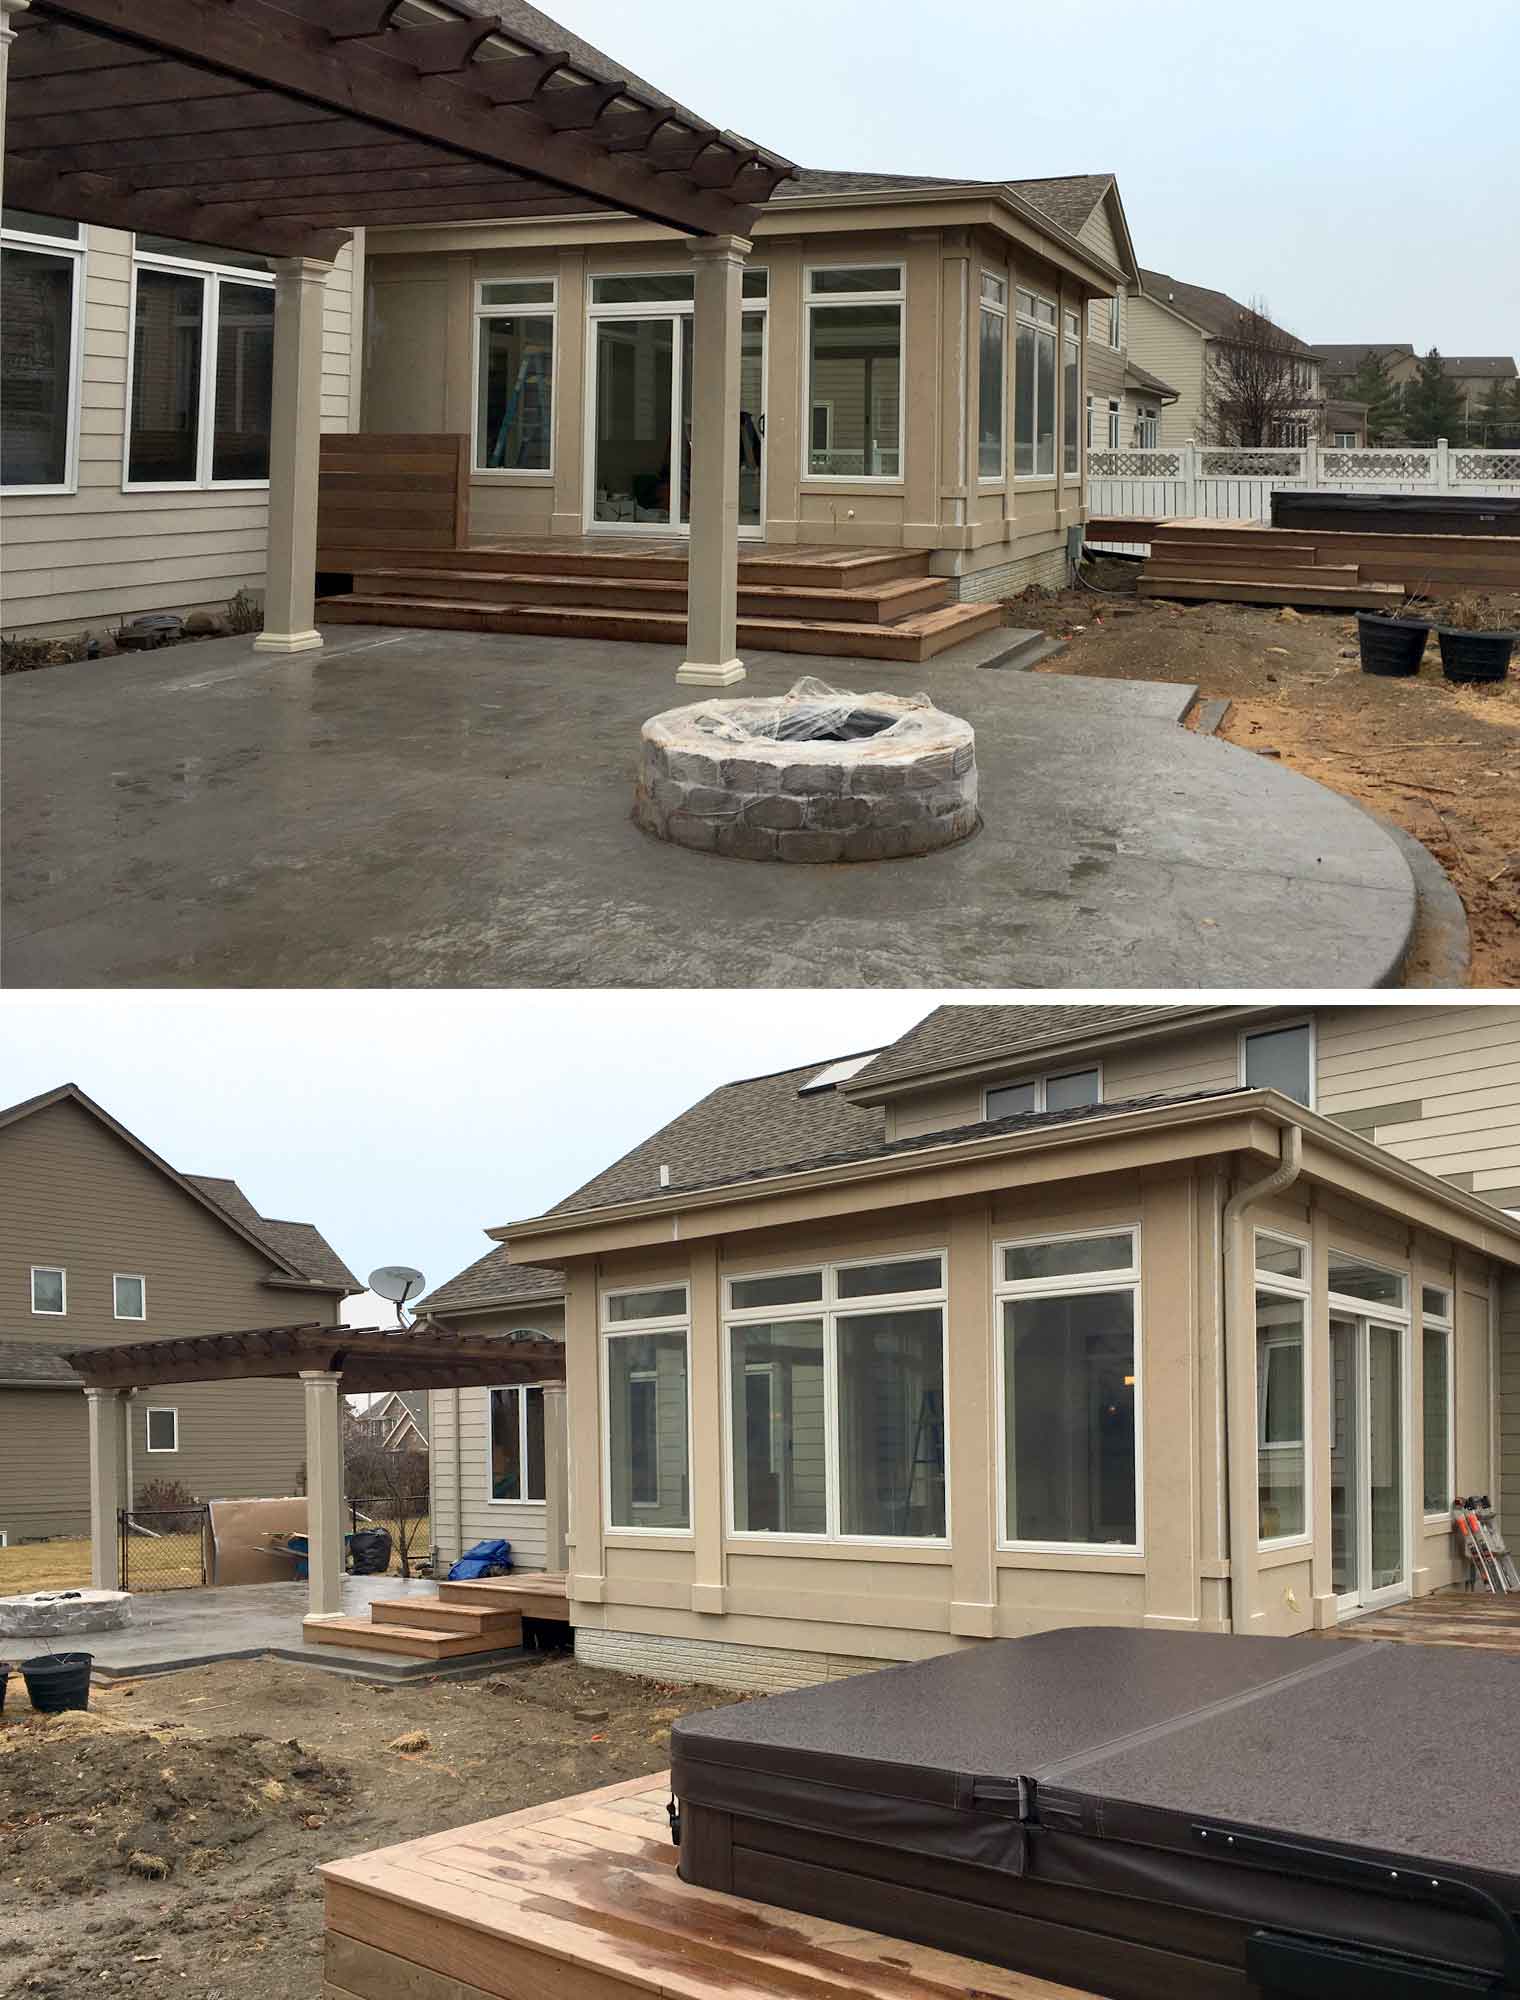 Sunroom addition exterior and patio with fire pit designed and being built by Silent Rivers Des Moines